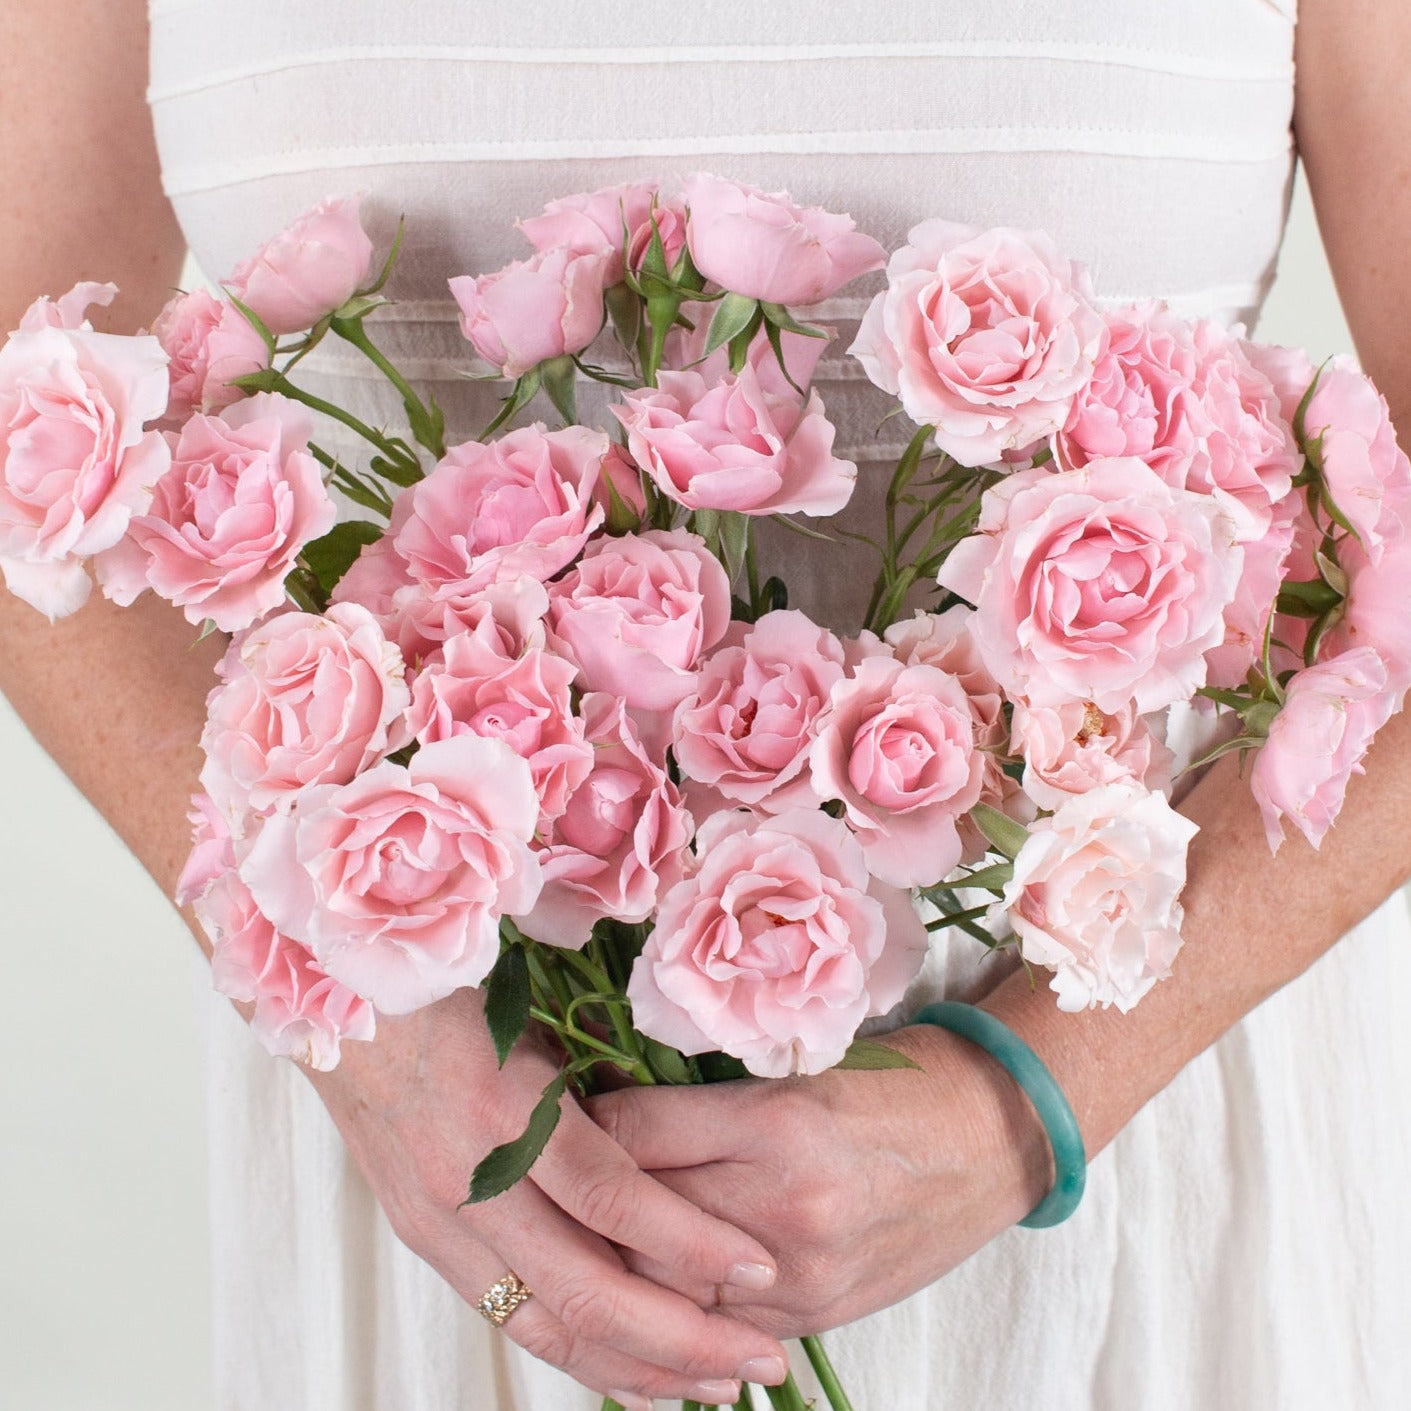 Blush Roses Bridesmaid Bouquet With Boho Flowers Bouquet Peonies